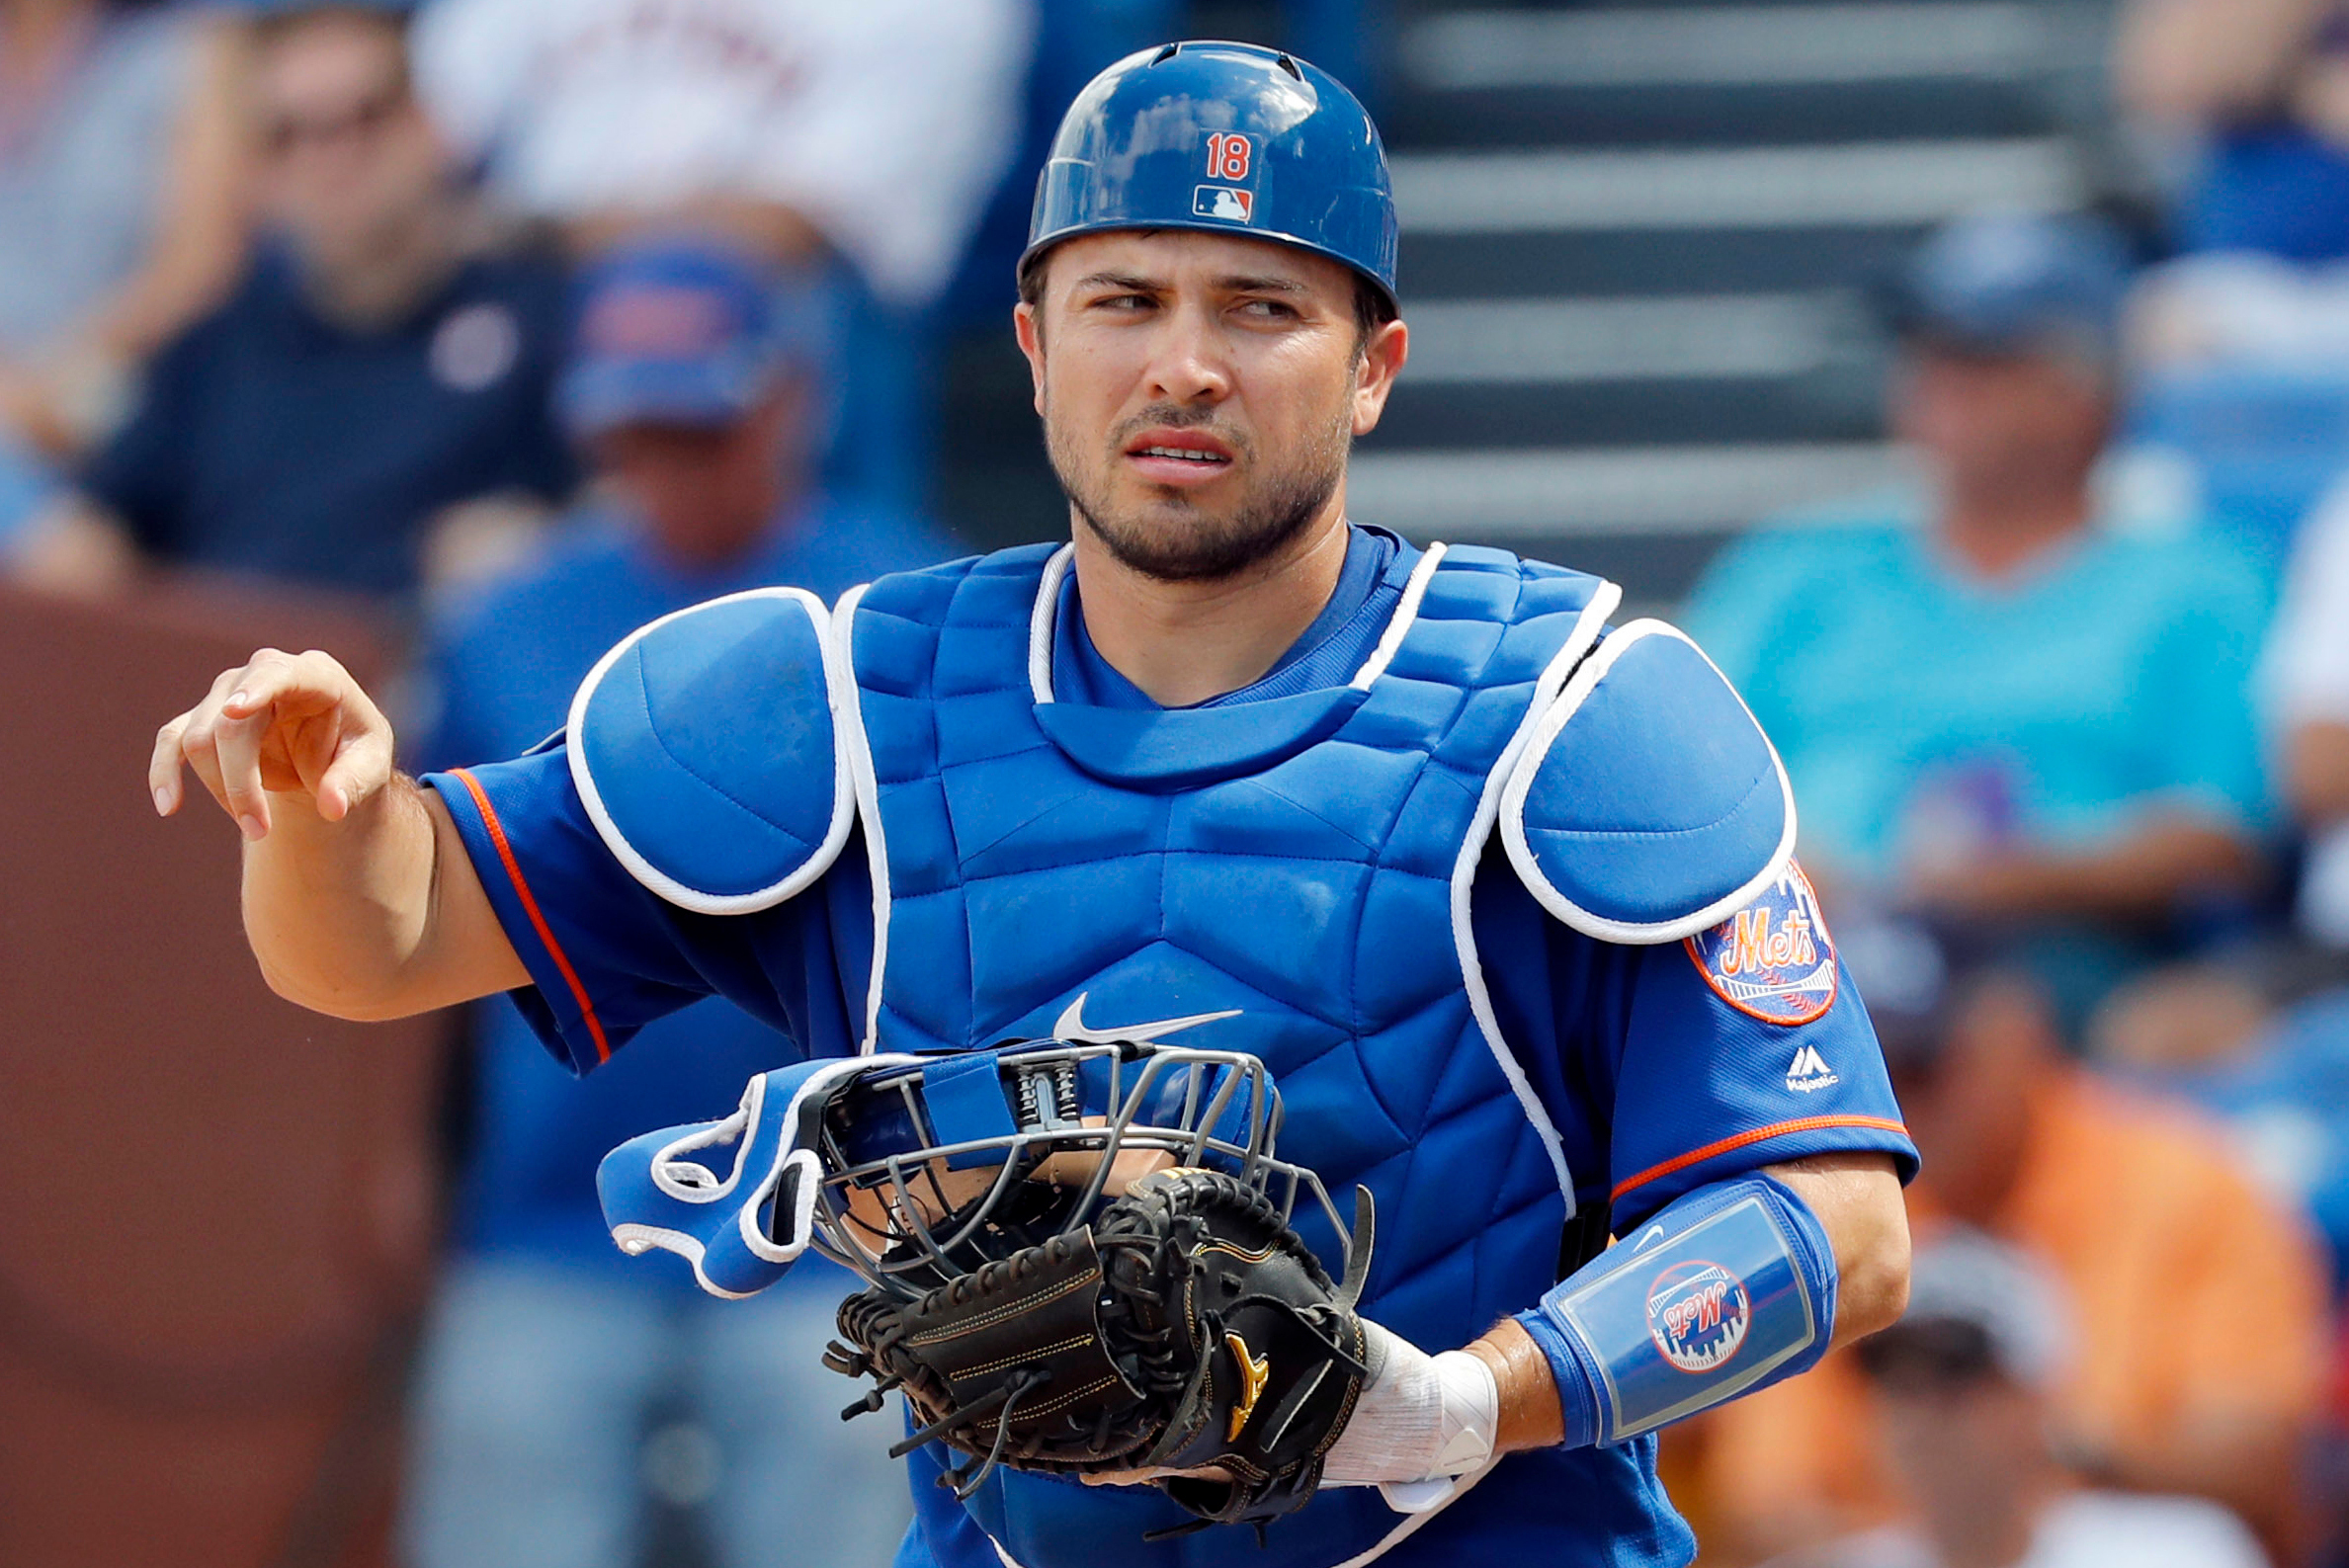 Prospect of the Day: Travis d'Arnaud, C, New York Mets - Minor League Ball